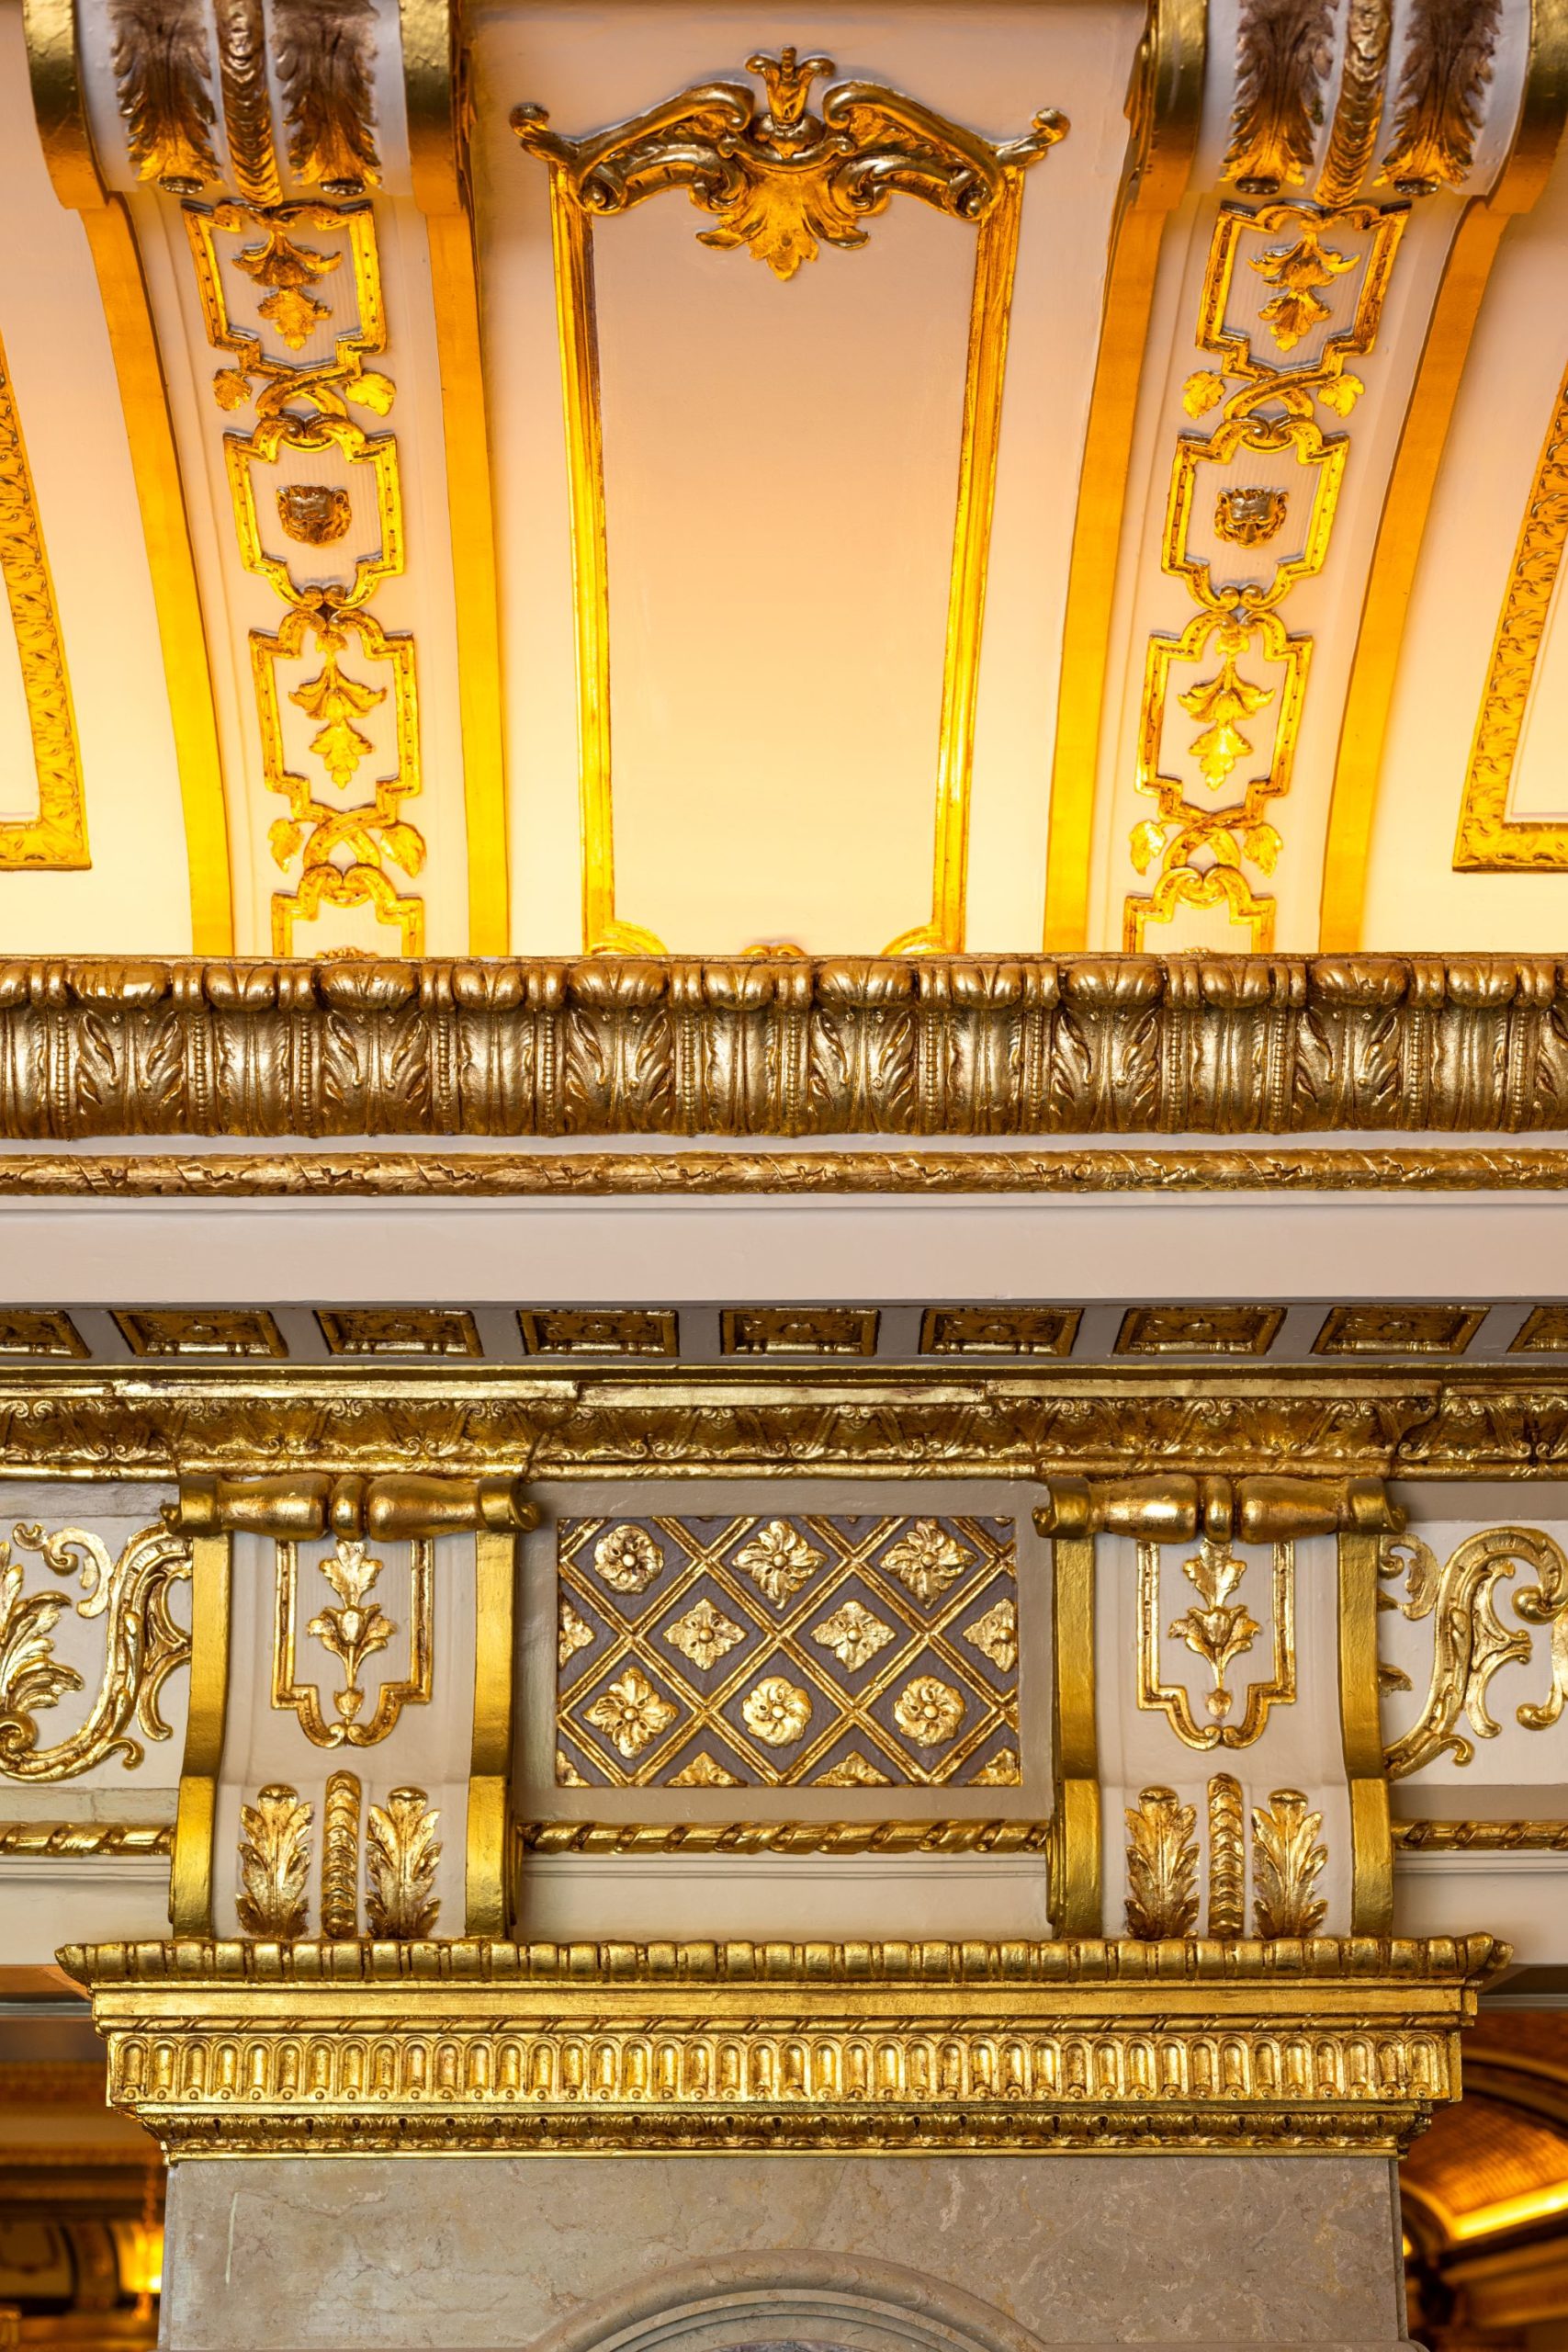 Additional detail in the Belden Stratford lobby. Photo by Nicholas James Photography